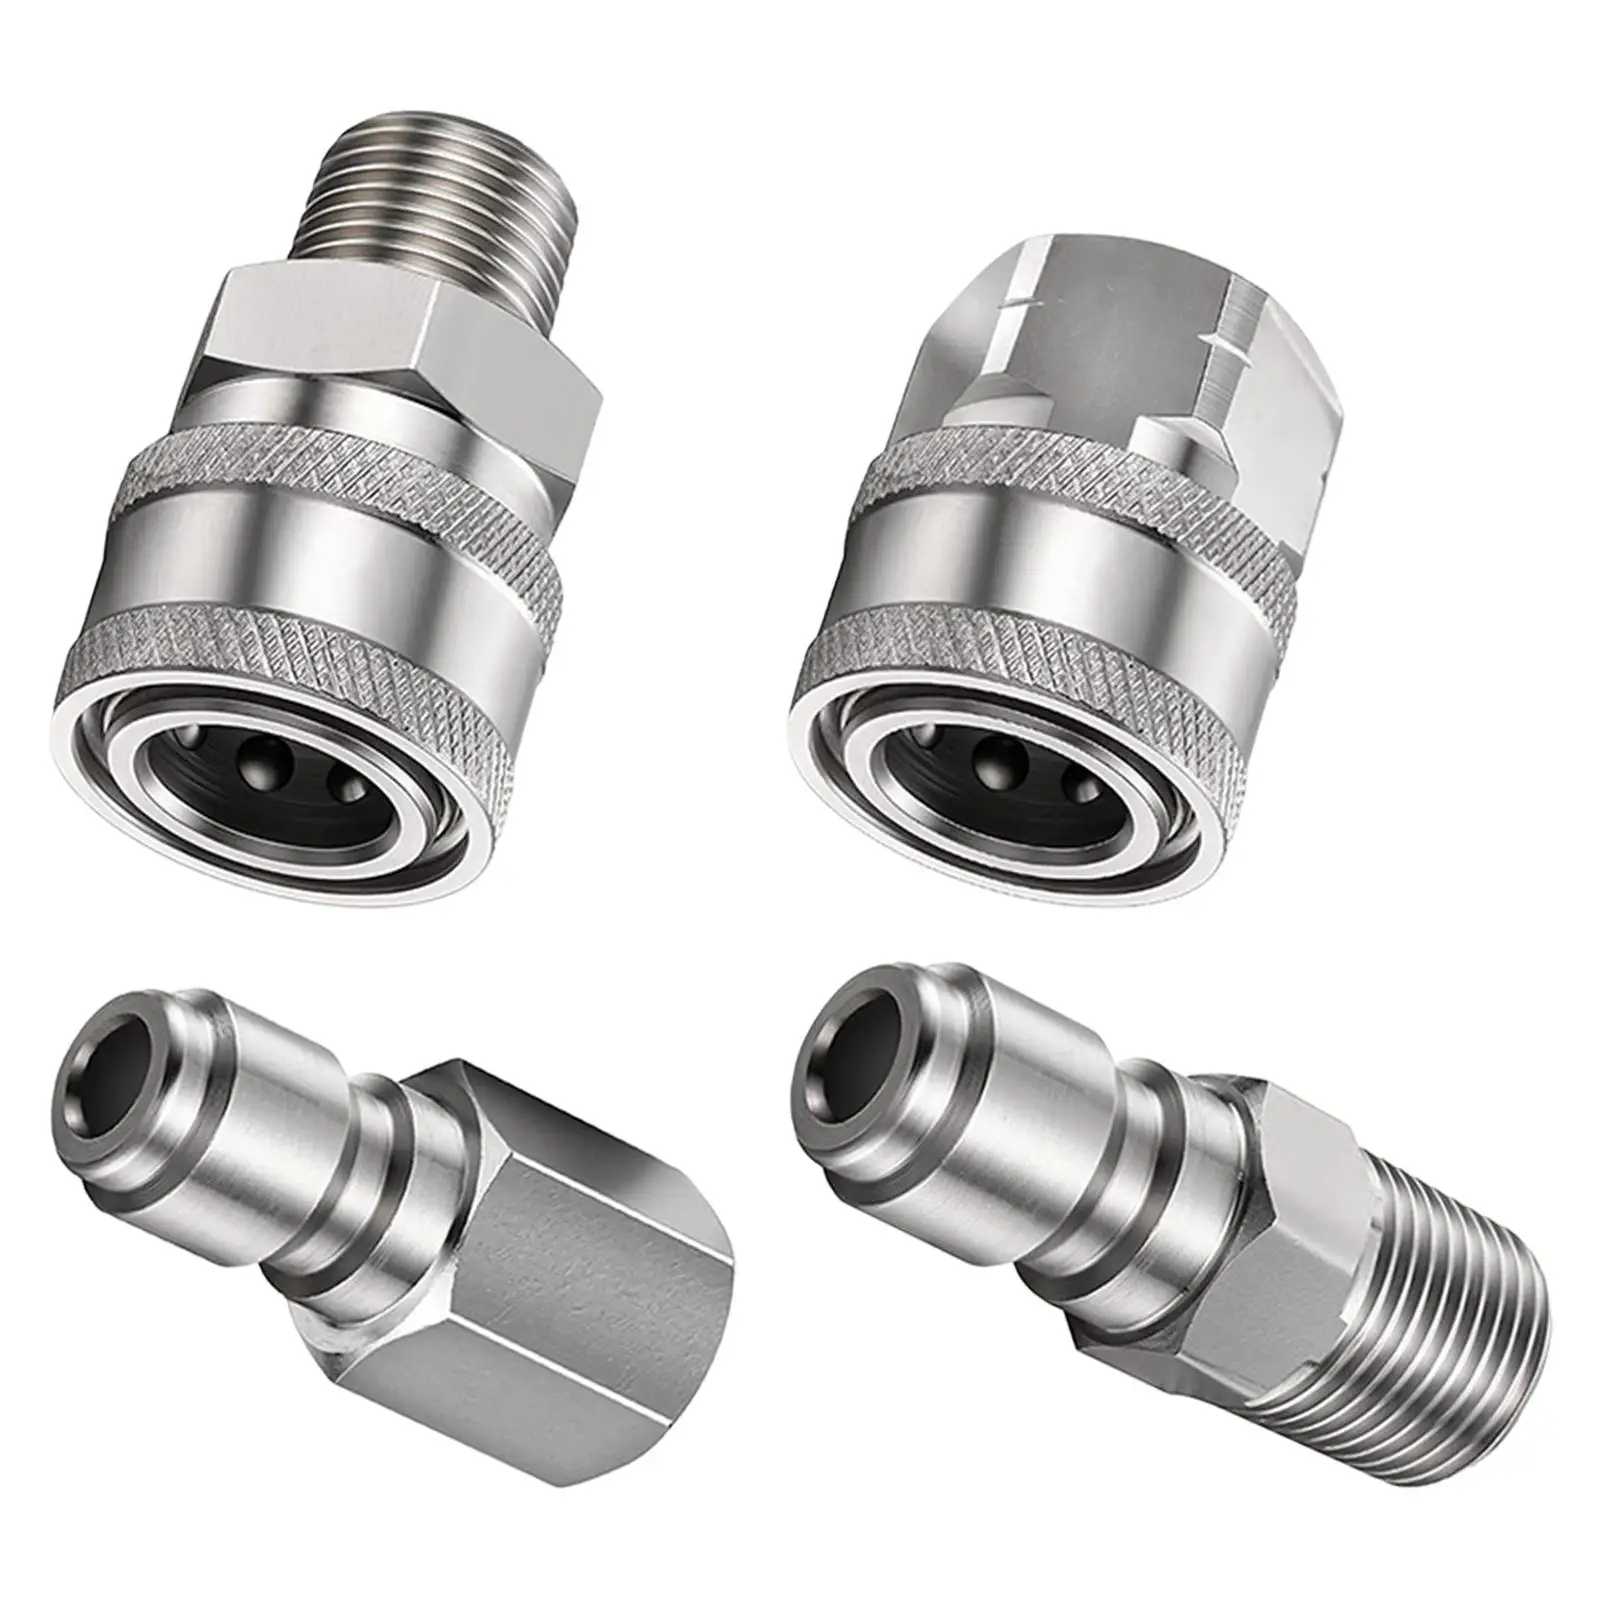 4 Pieces Pressure Washer Adapter Set Swivel to Quick Connect Fitting Replacement